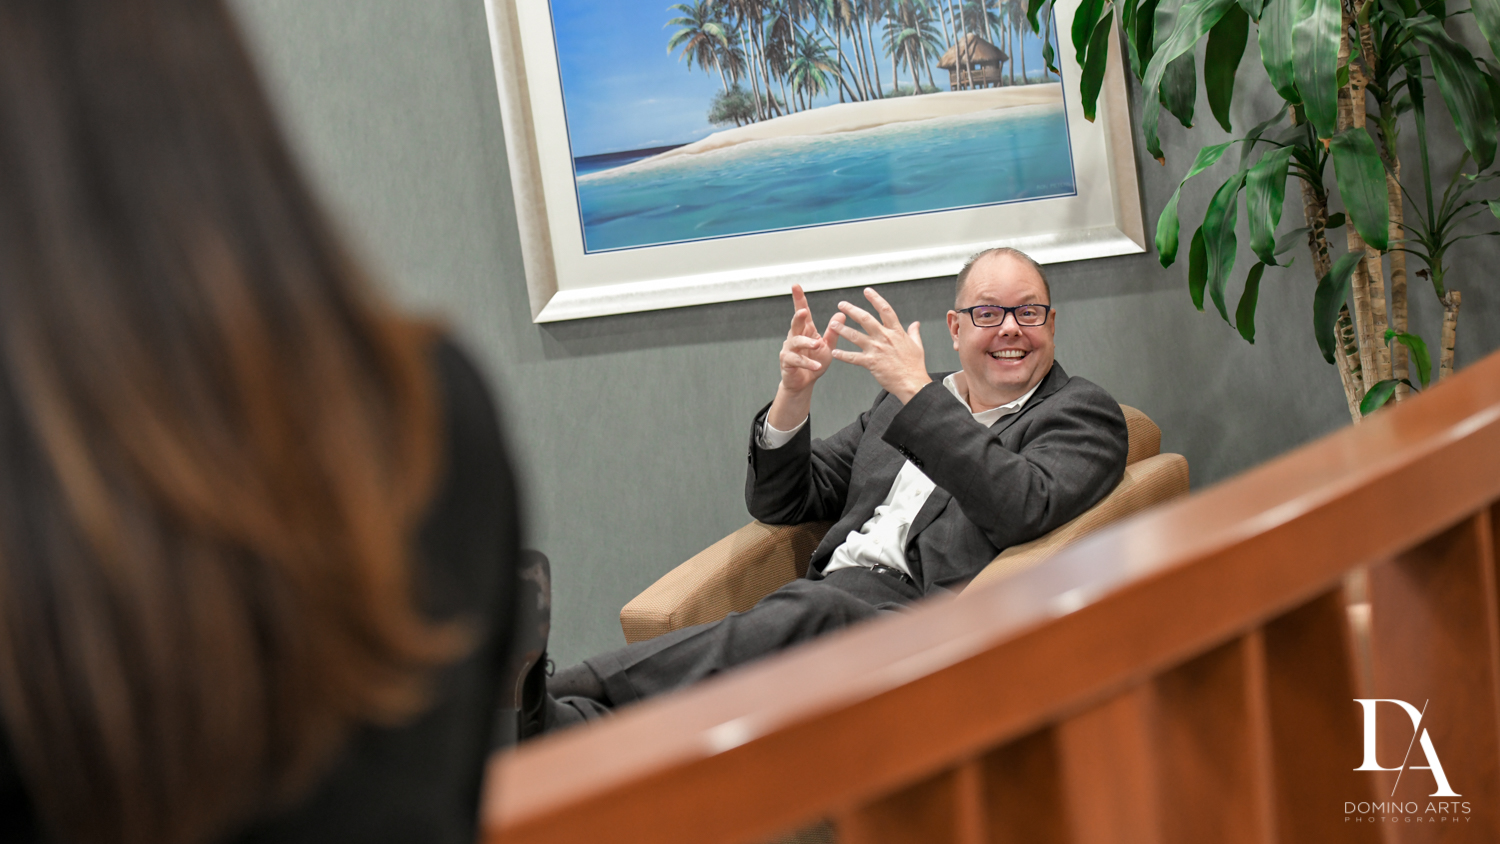 fun staff photos at Corporate Photography Power Financial Credit Union in Pembroke Pines